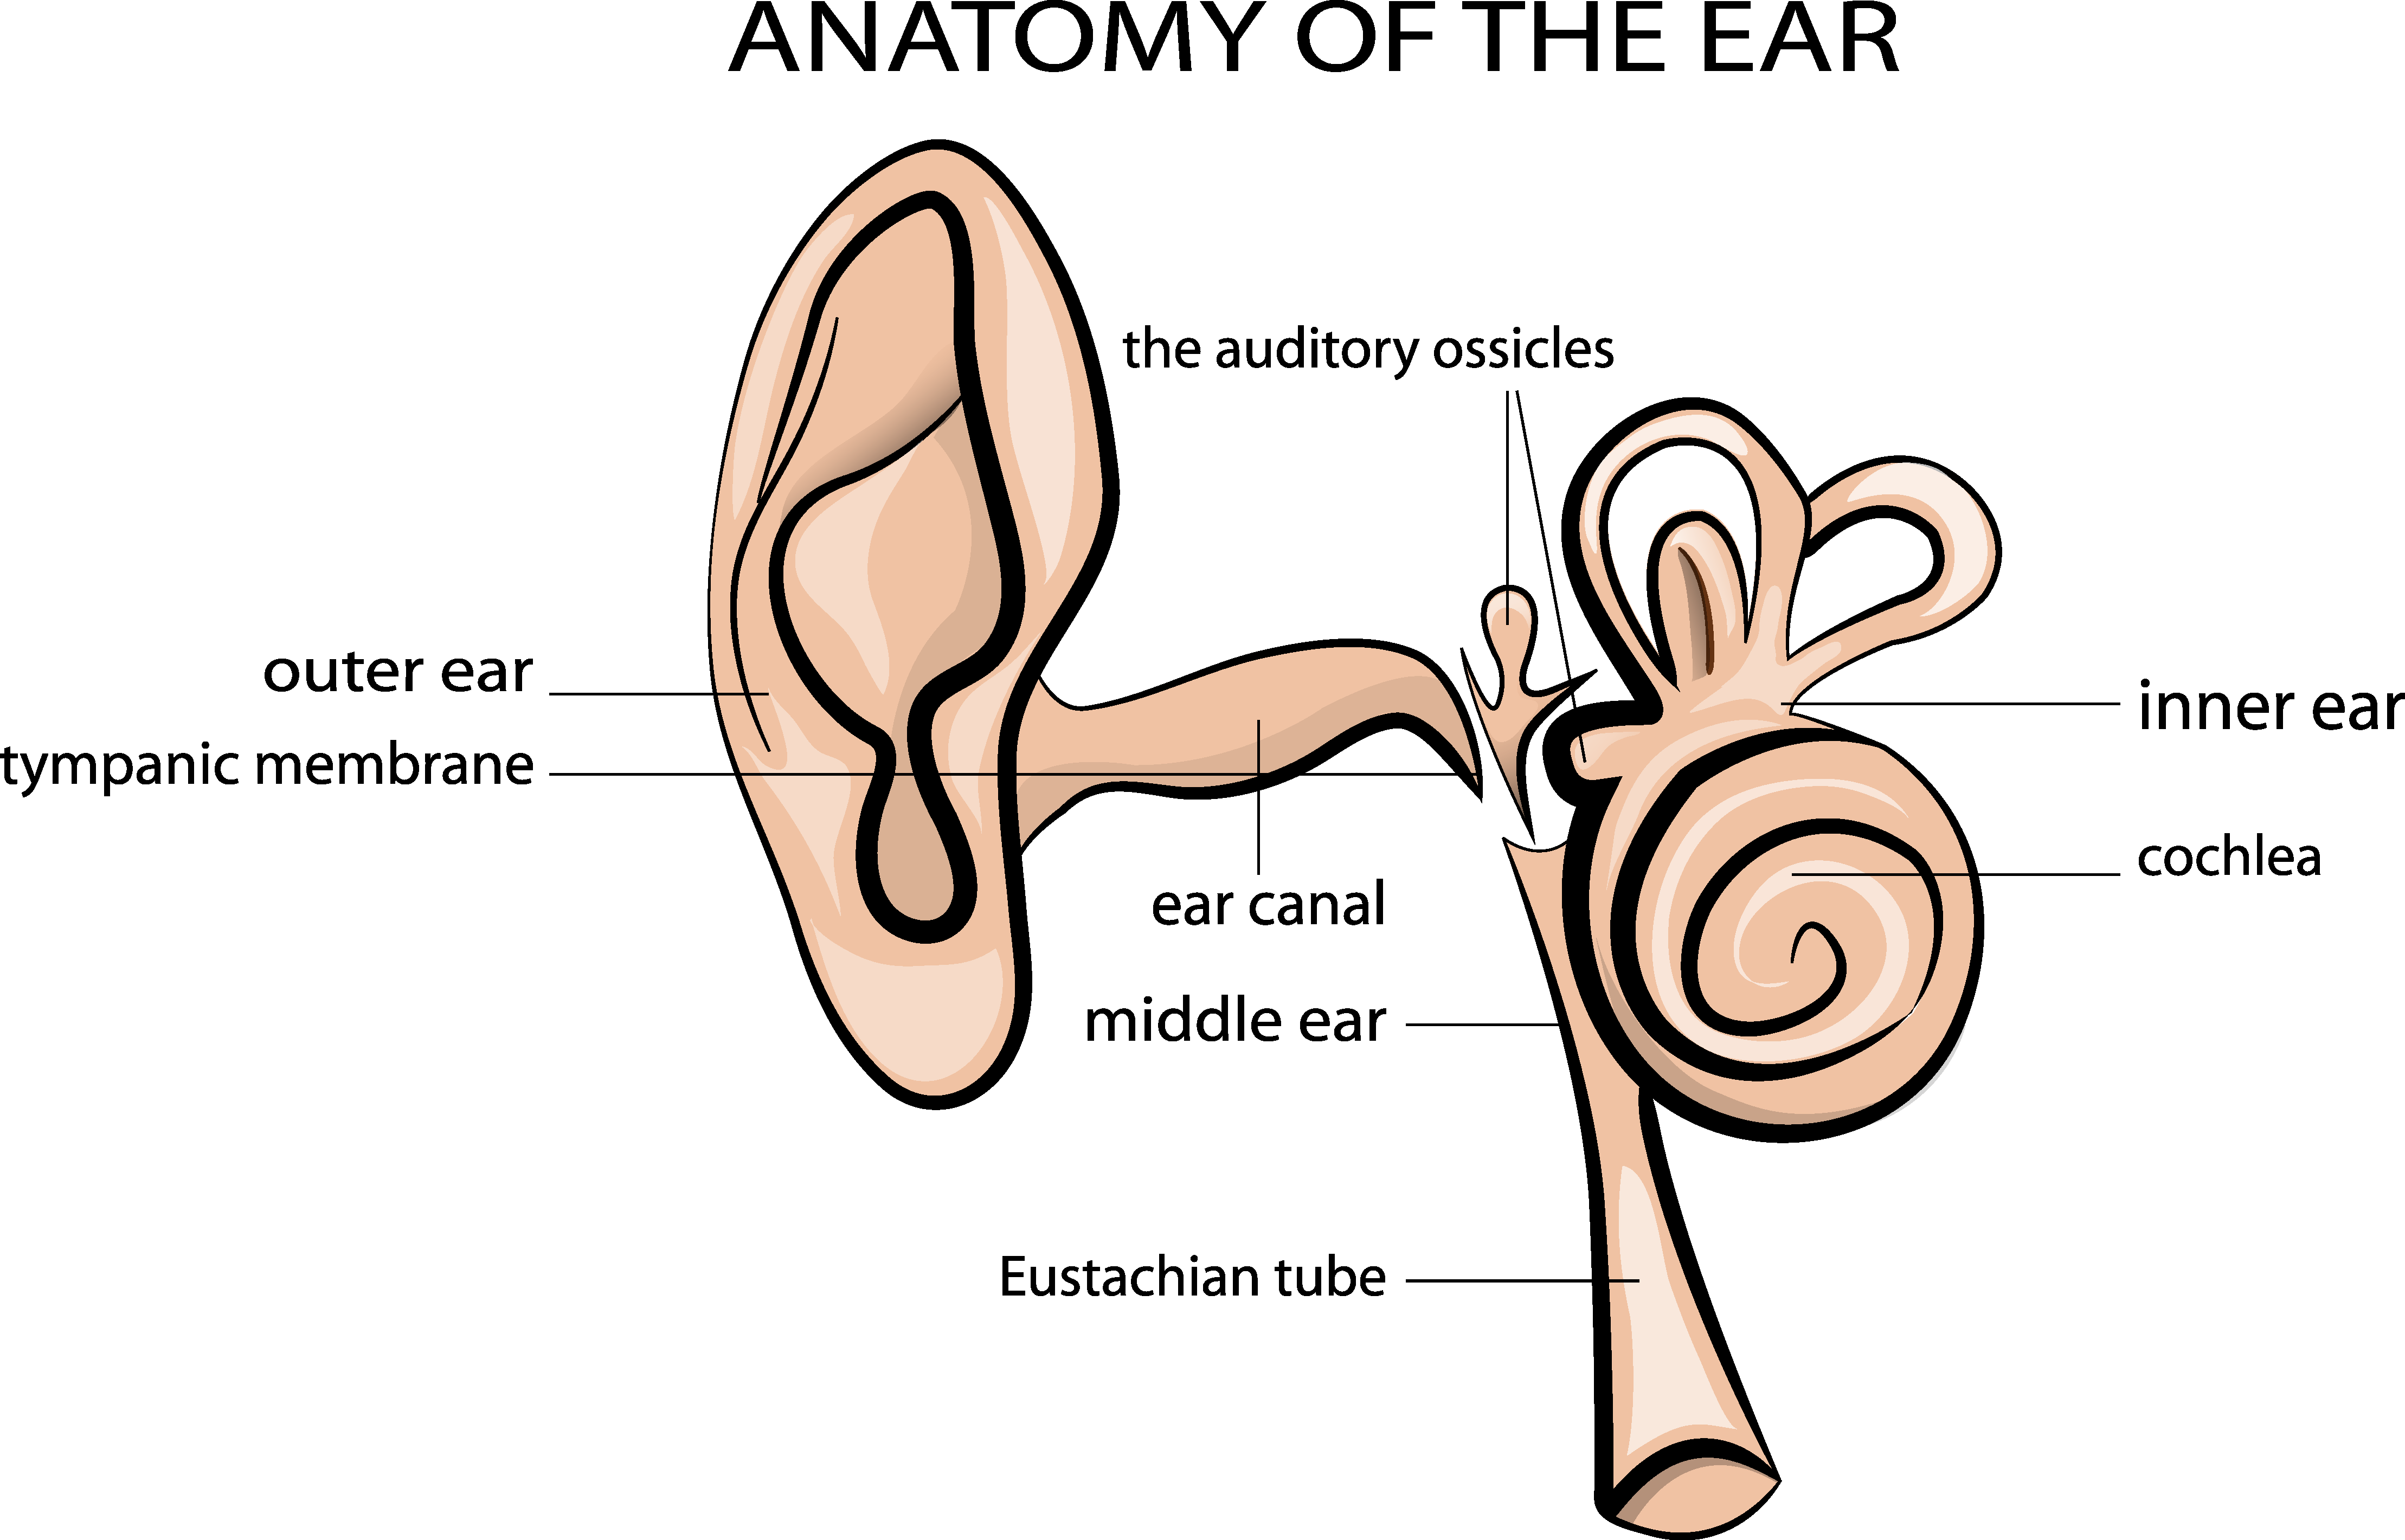 Ear infections are caused by 